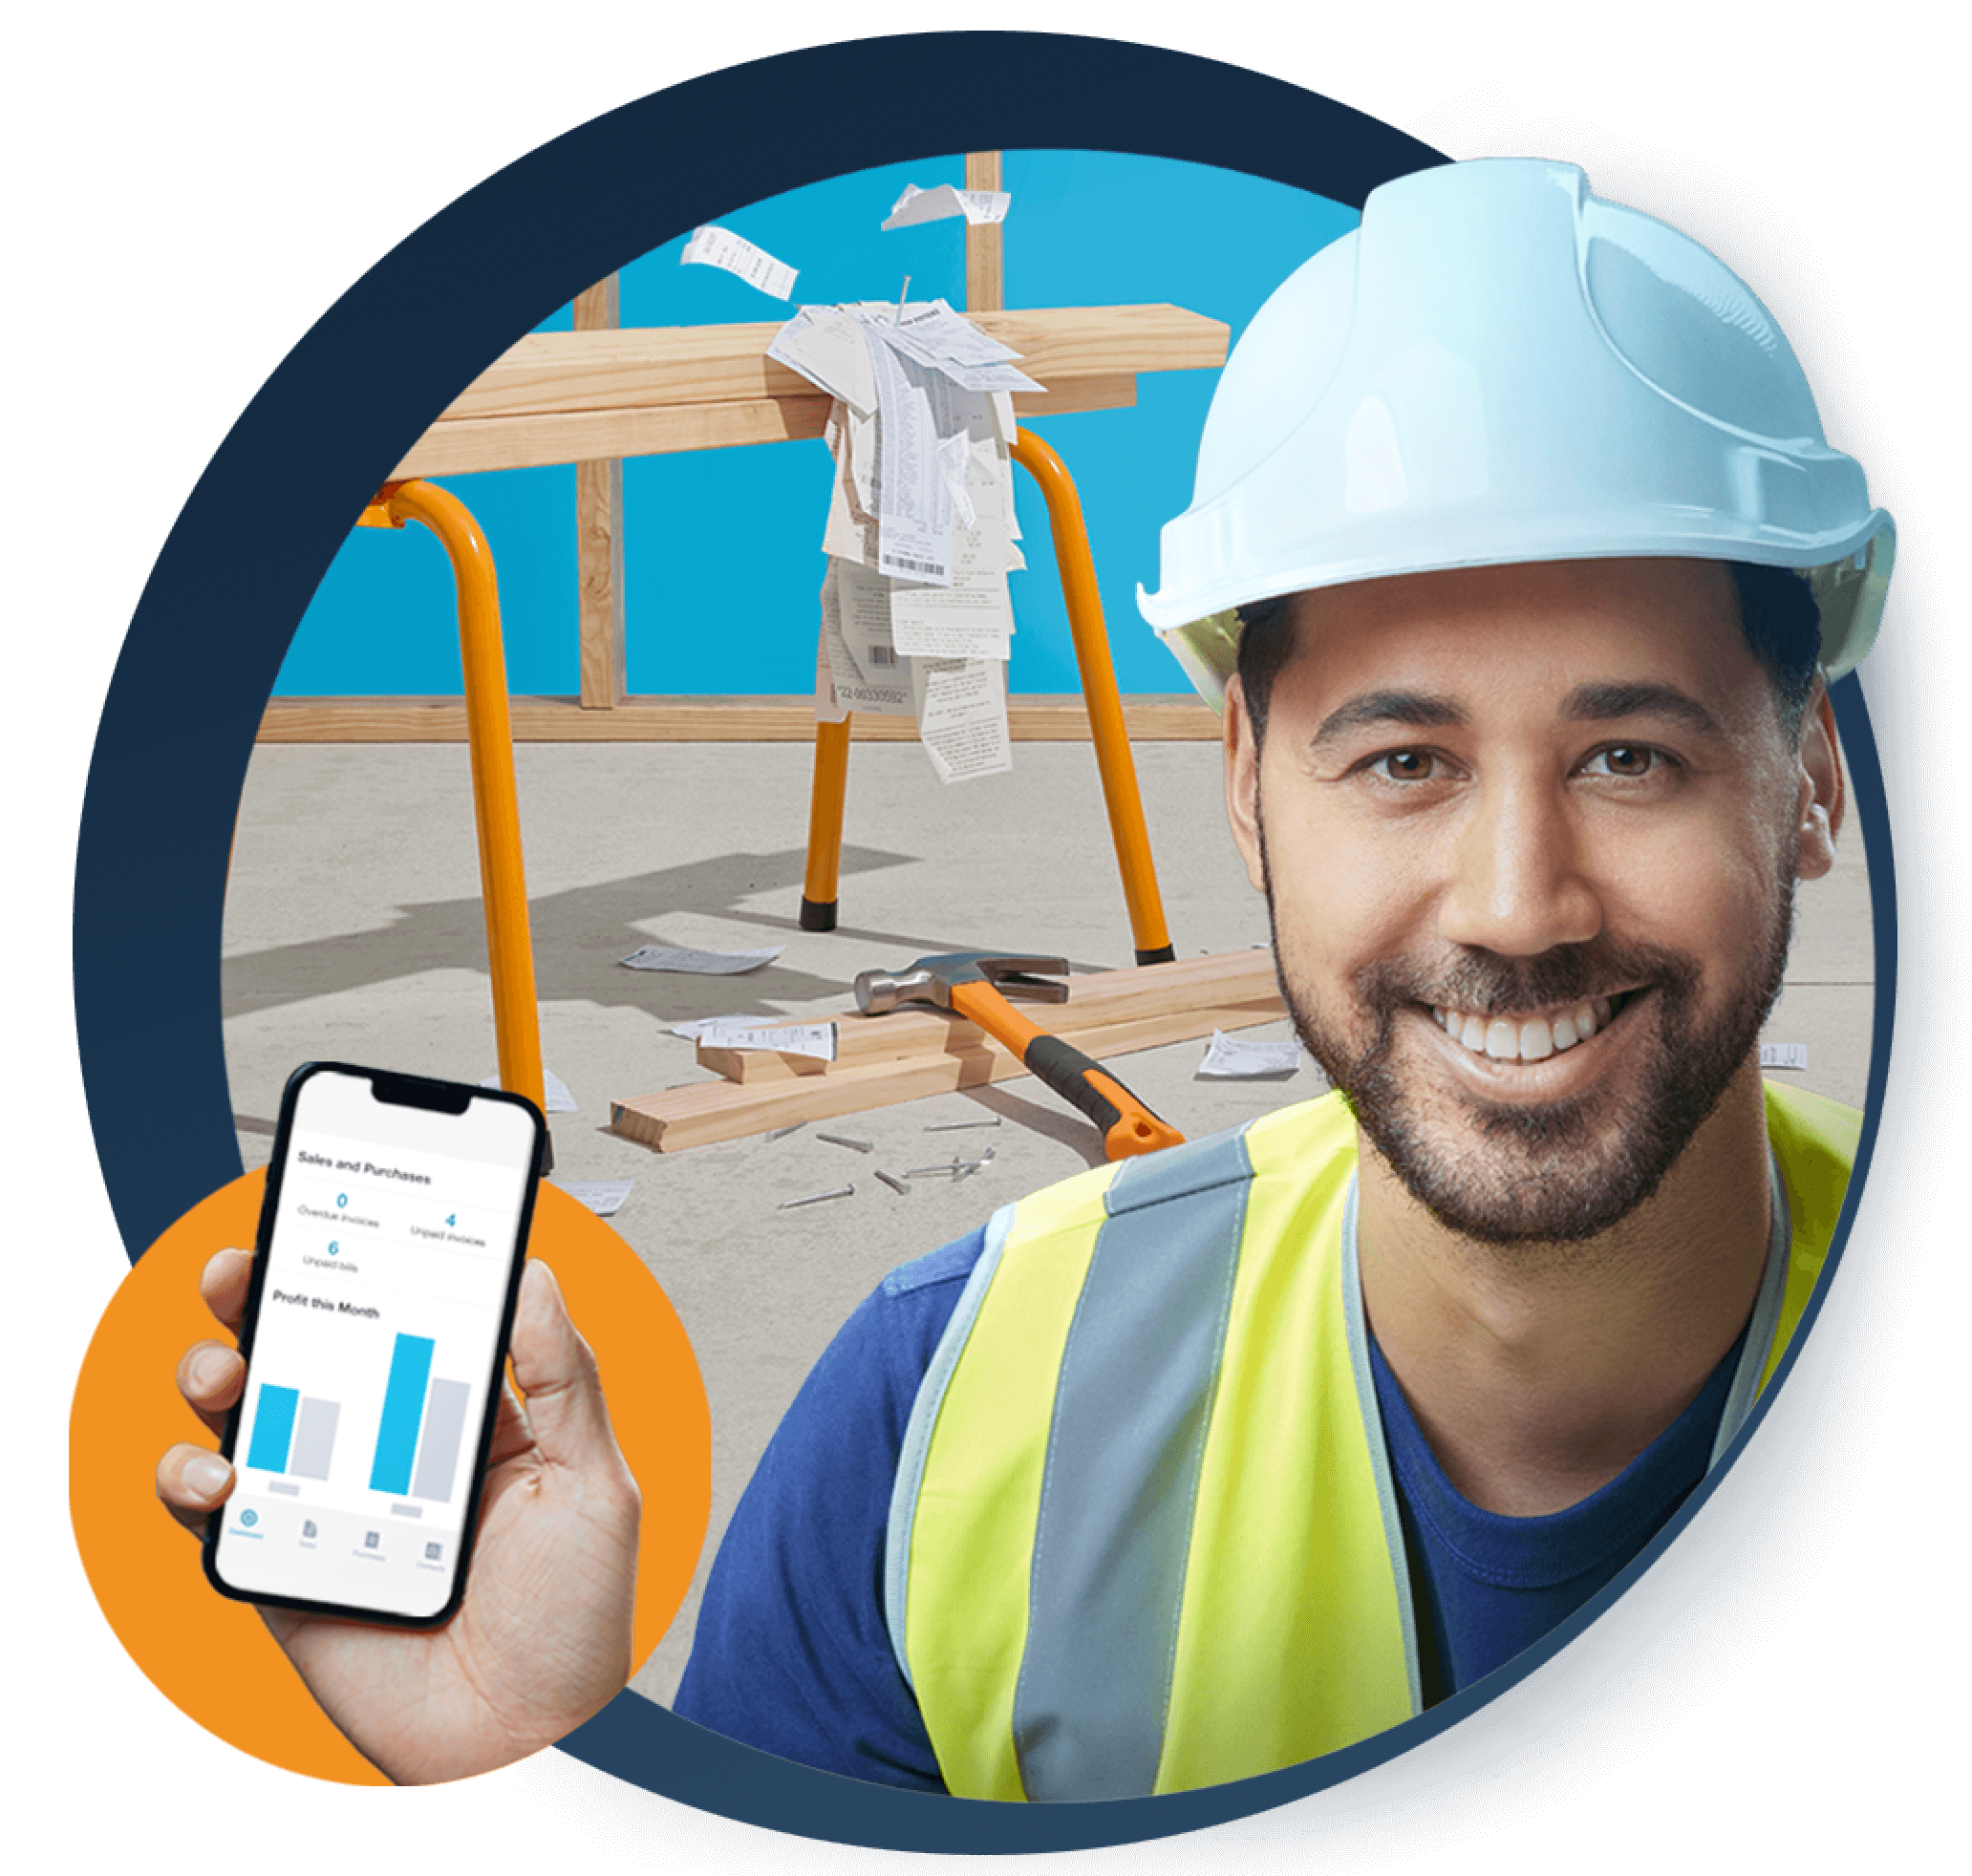 Construction working standing in front of a construction site and smiling, with a hand holding up a phone with the Xero app